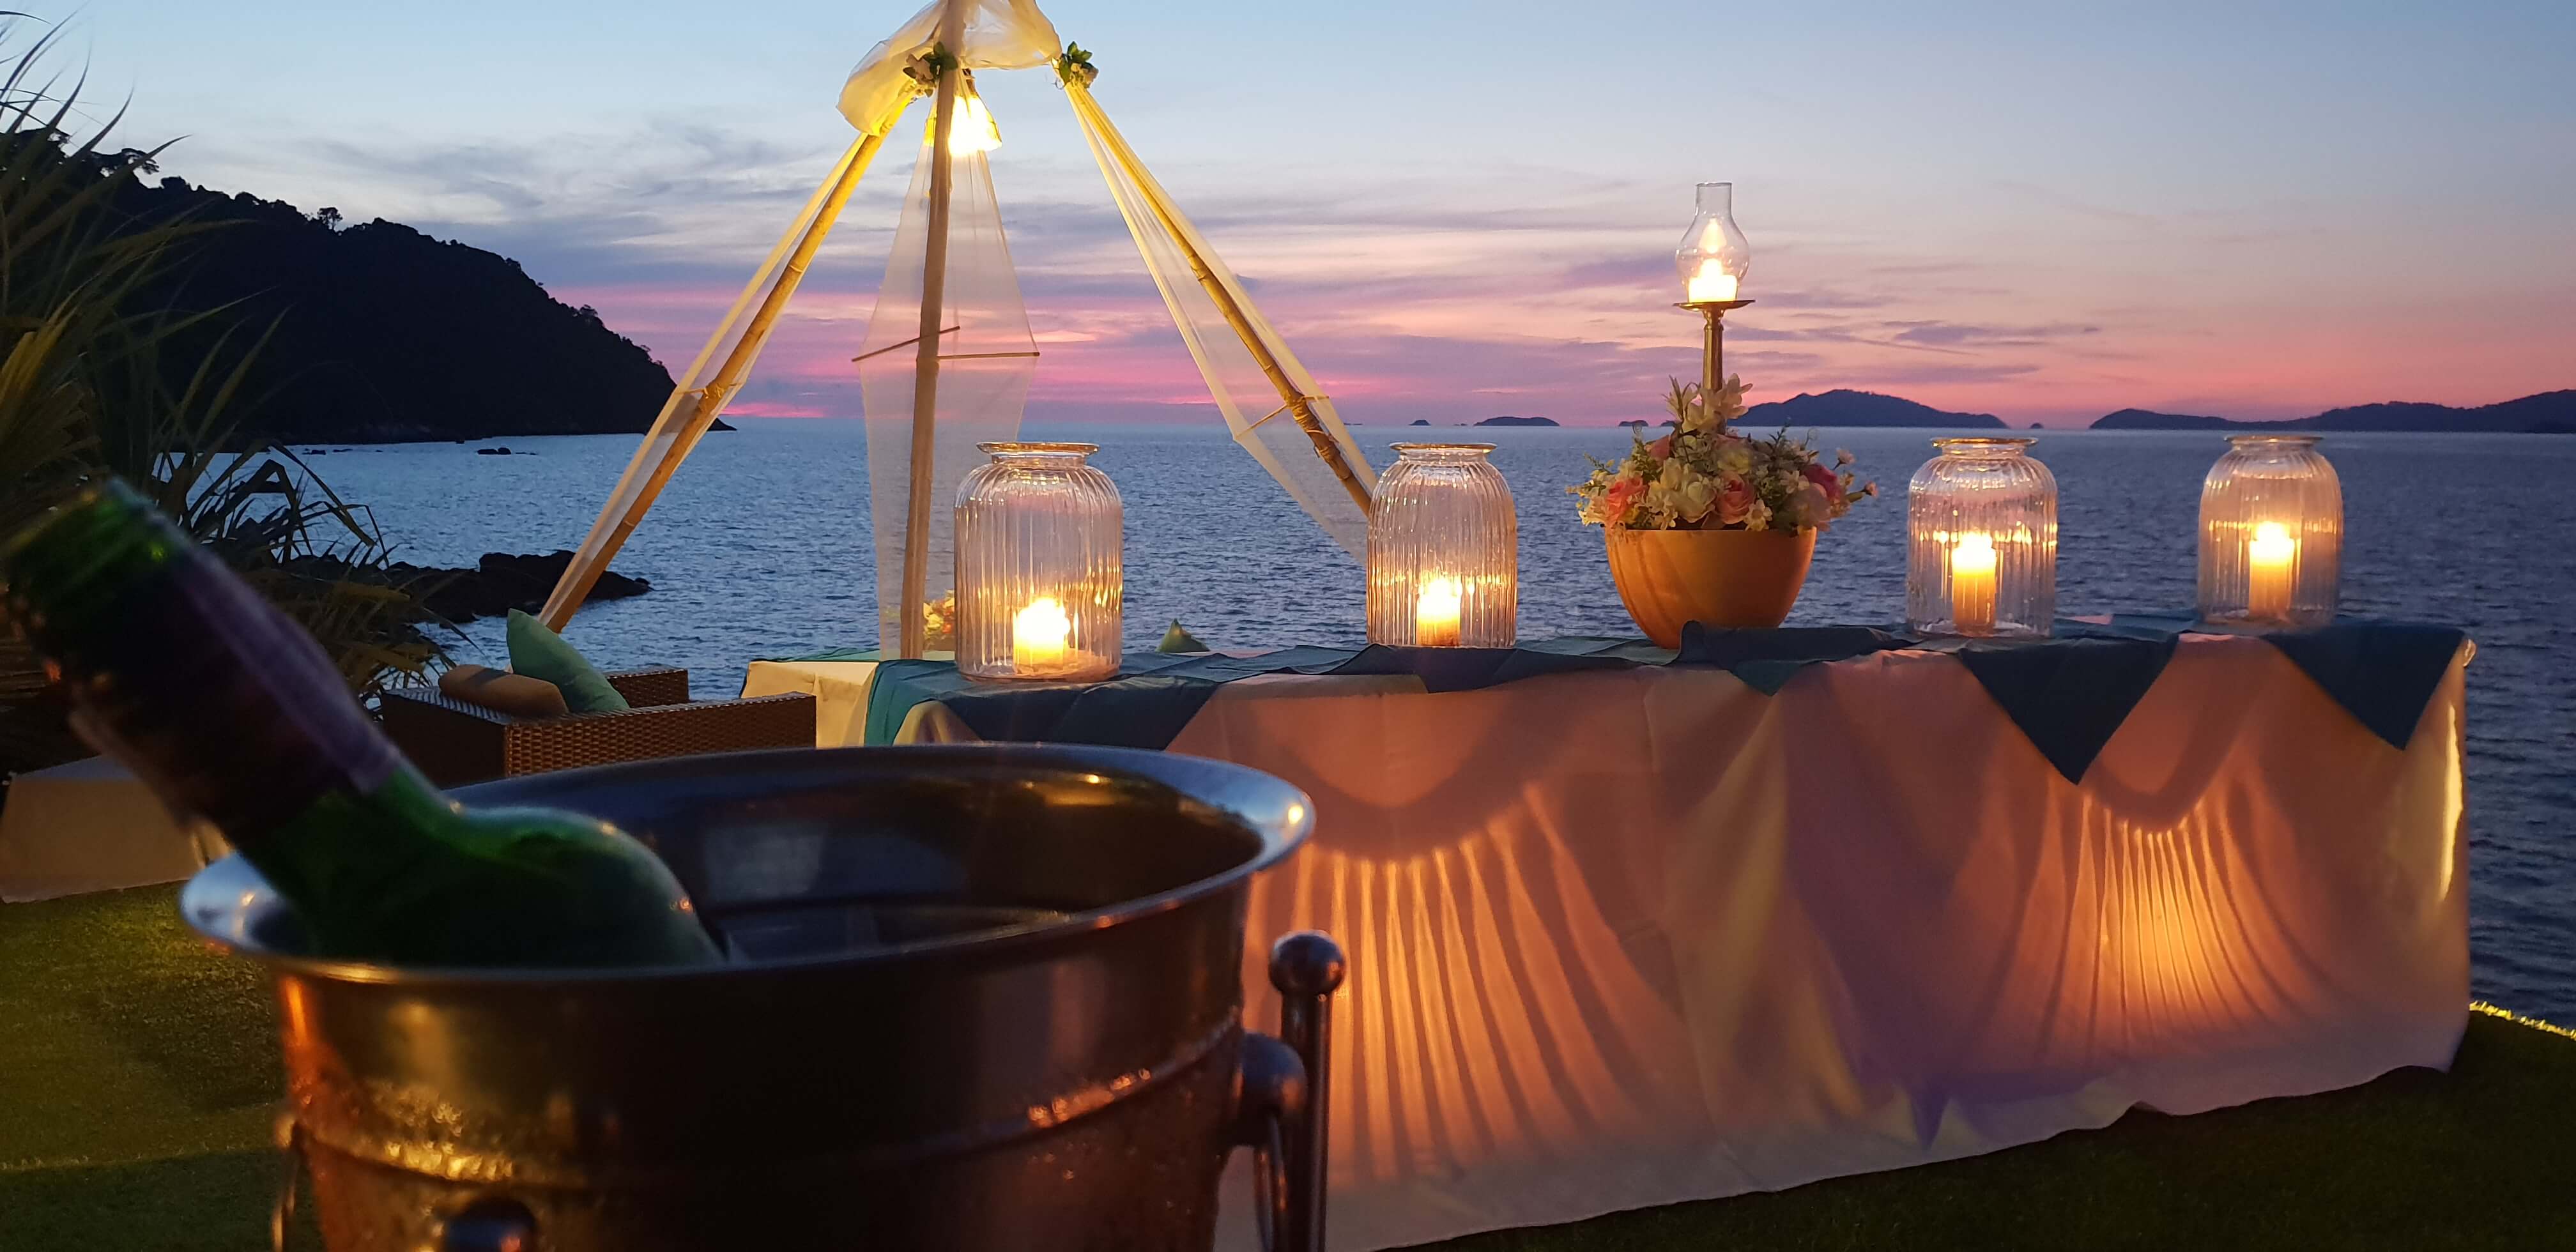 The sunset dining experience at The Cliff Lipe resort is truly one of a kind